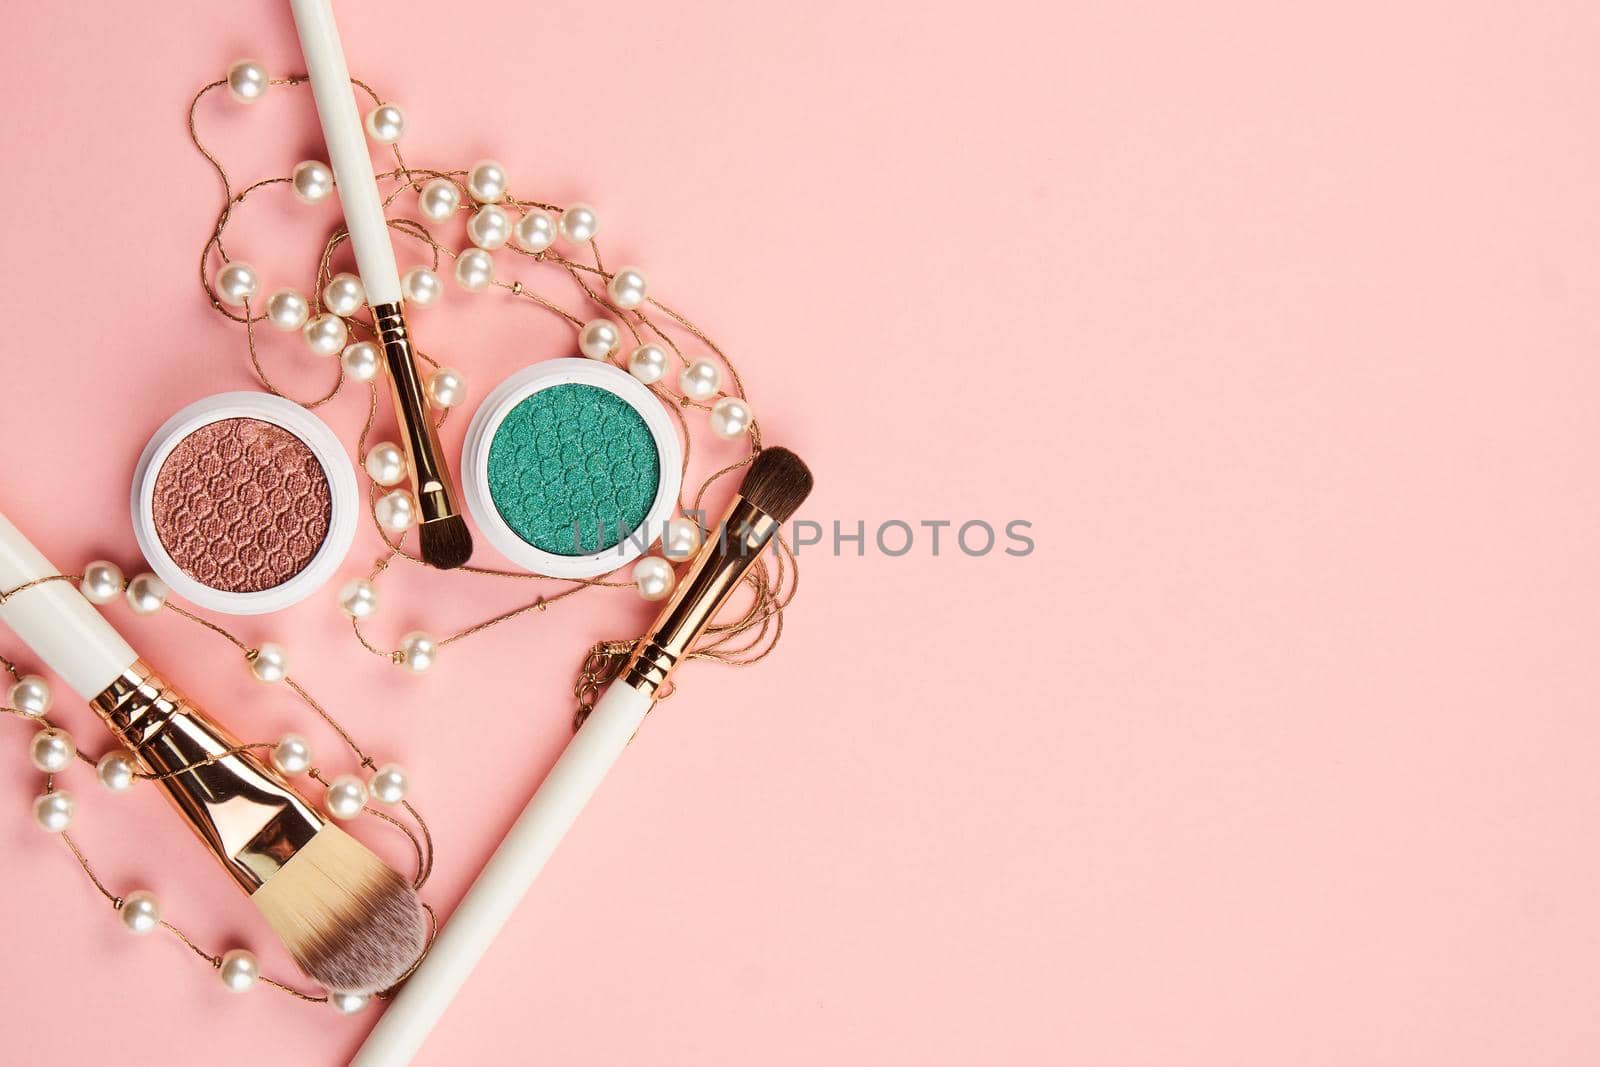 Female makeup decoration accessories on the table pink background top view by SHOTPRIME